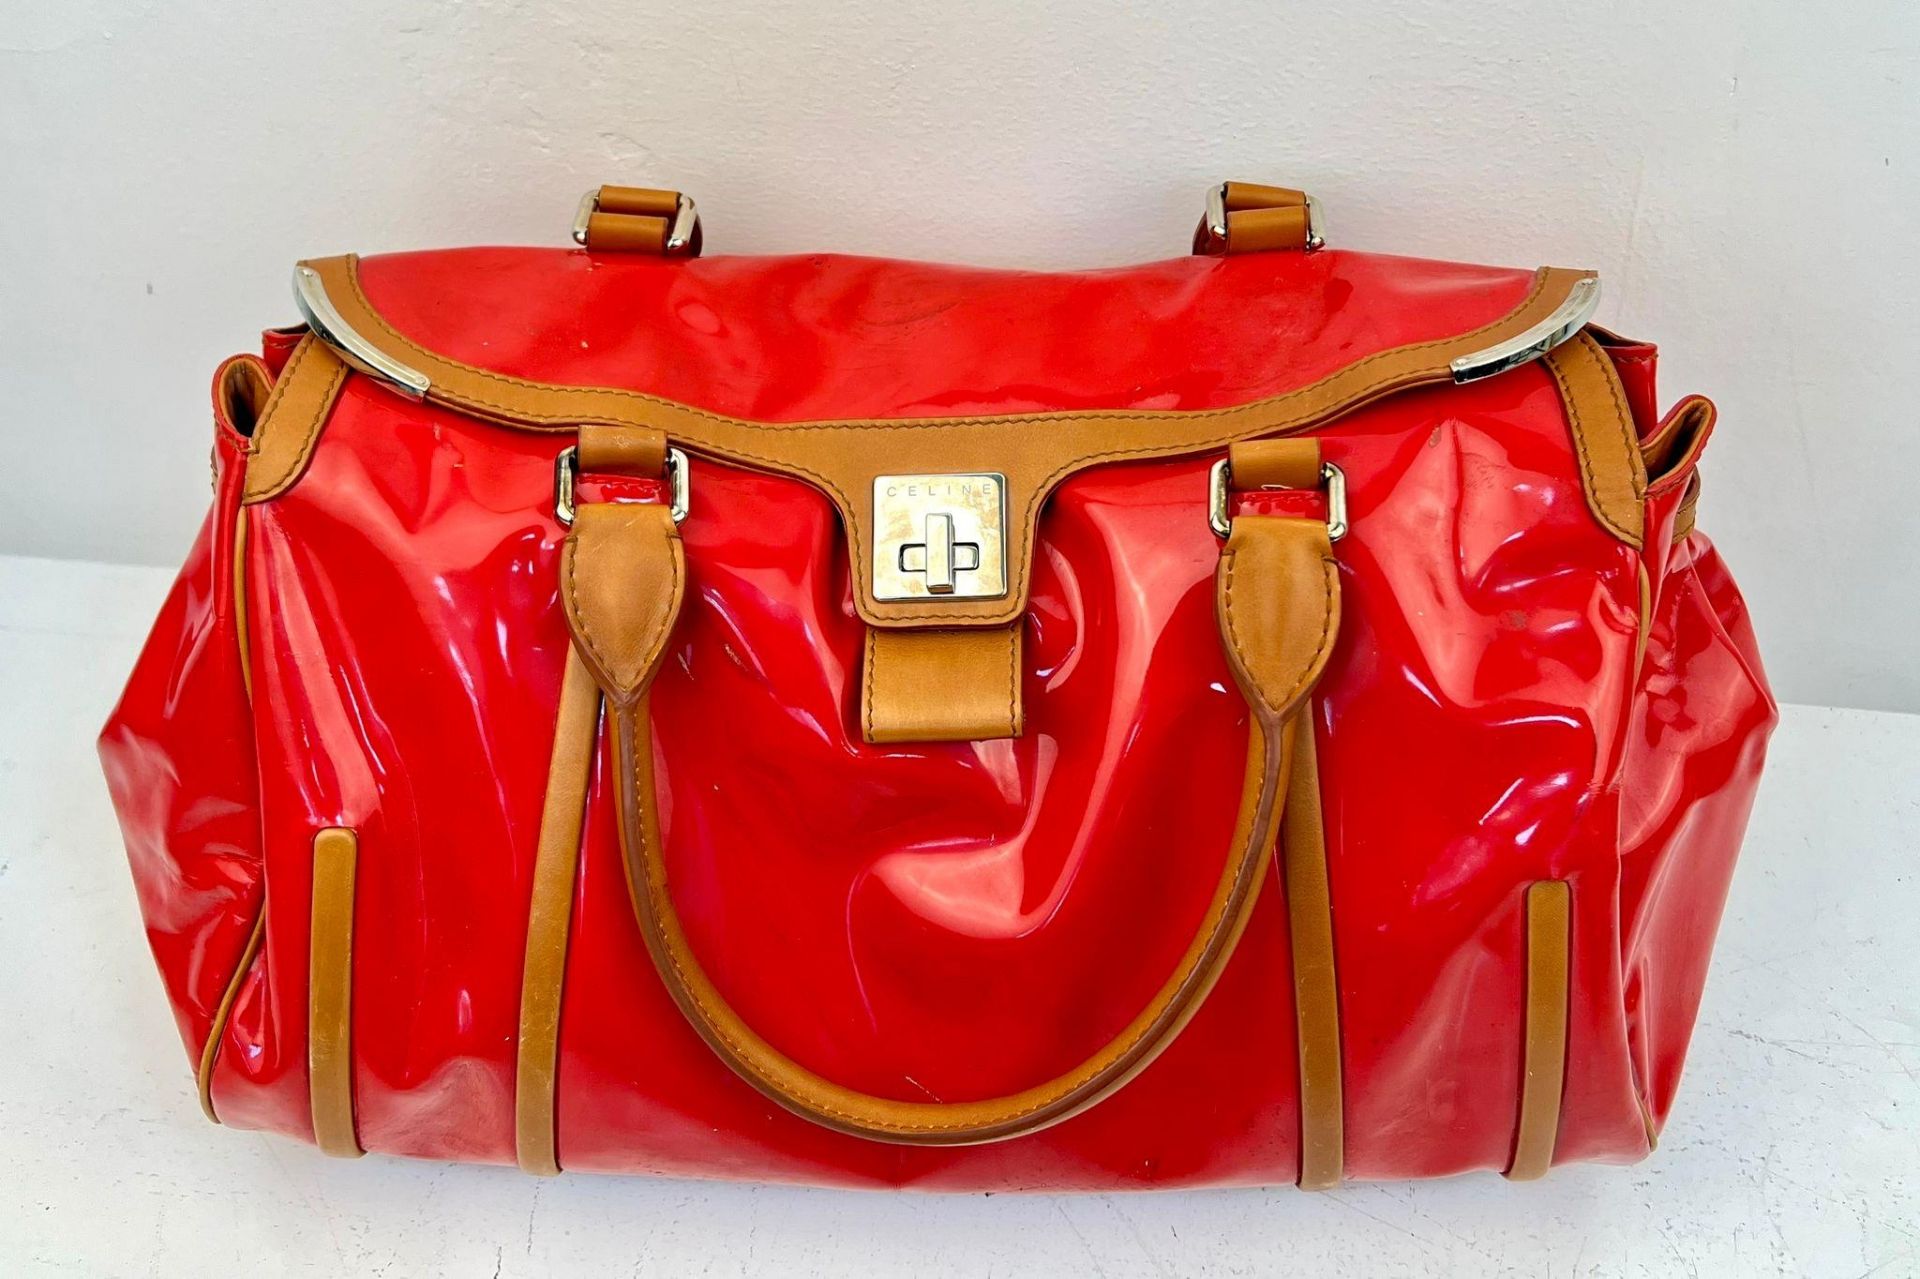 A Celine Red Patent Tote Bag. Brown leather handles and trim. Spacious interior with zipped